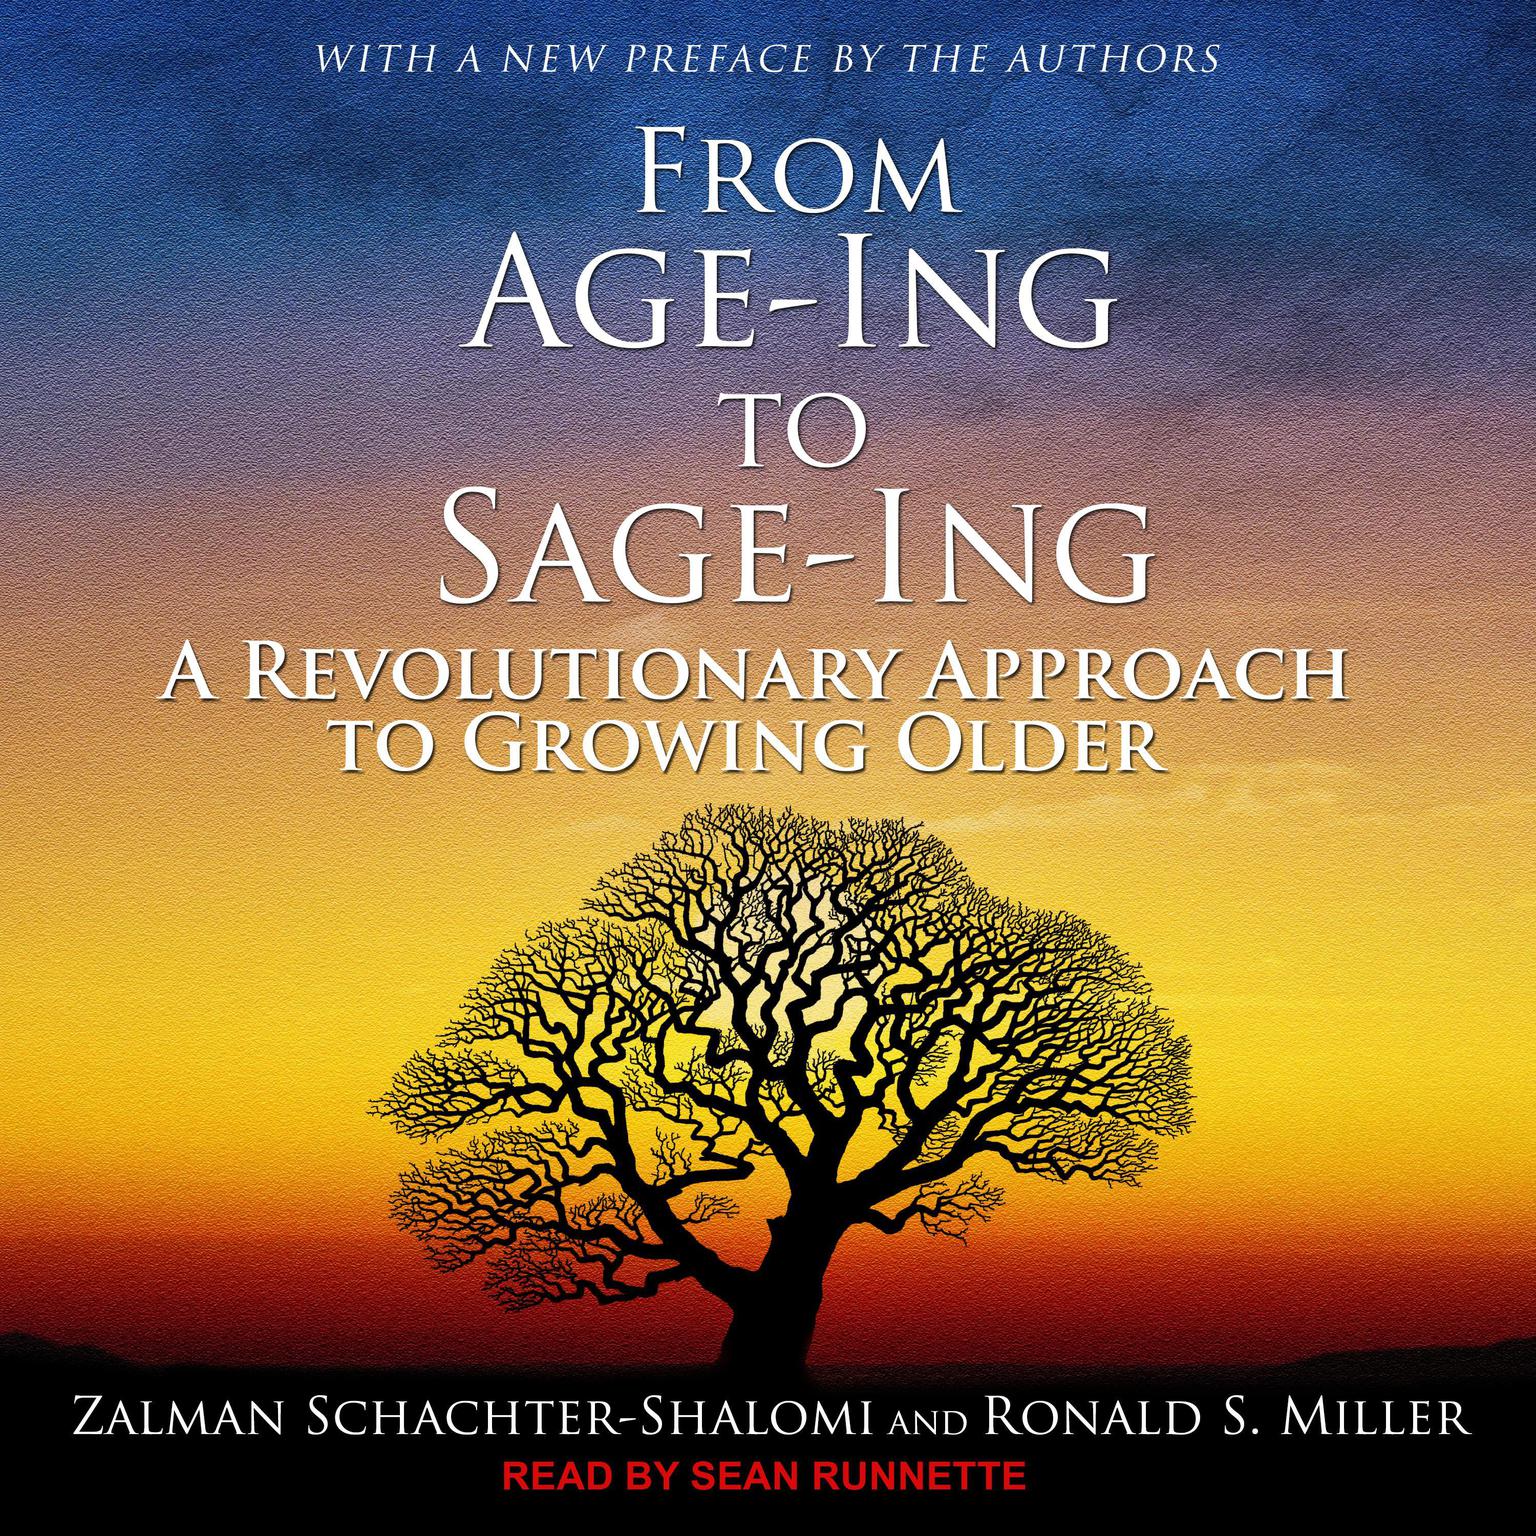 From Age-Ing to Sage-Ing: A Revolutionary Approach to Growing Older Audiobook, by Zalman Schachter-Shalomi